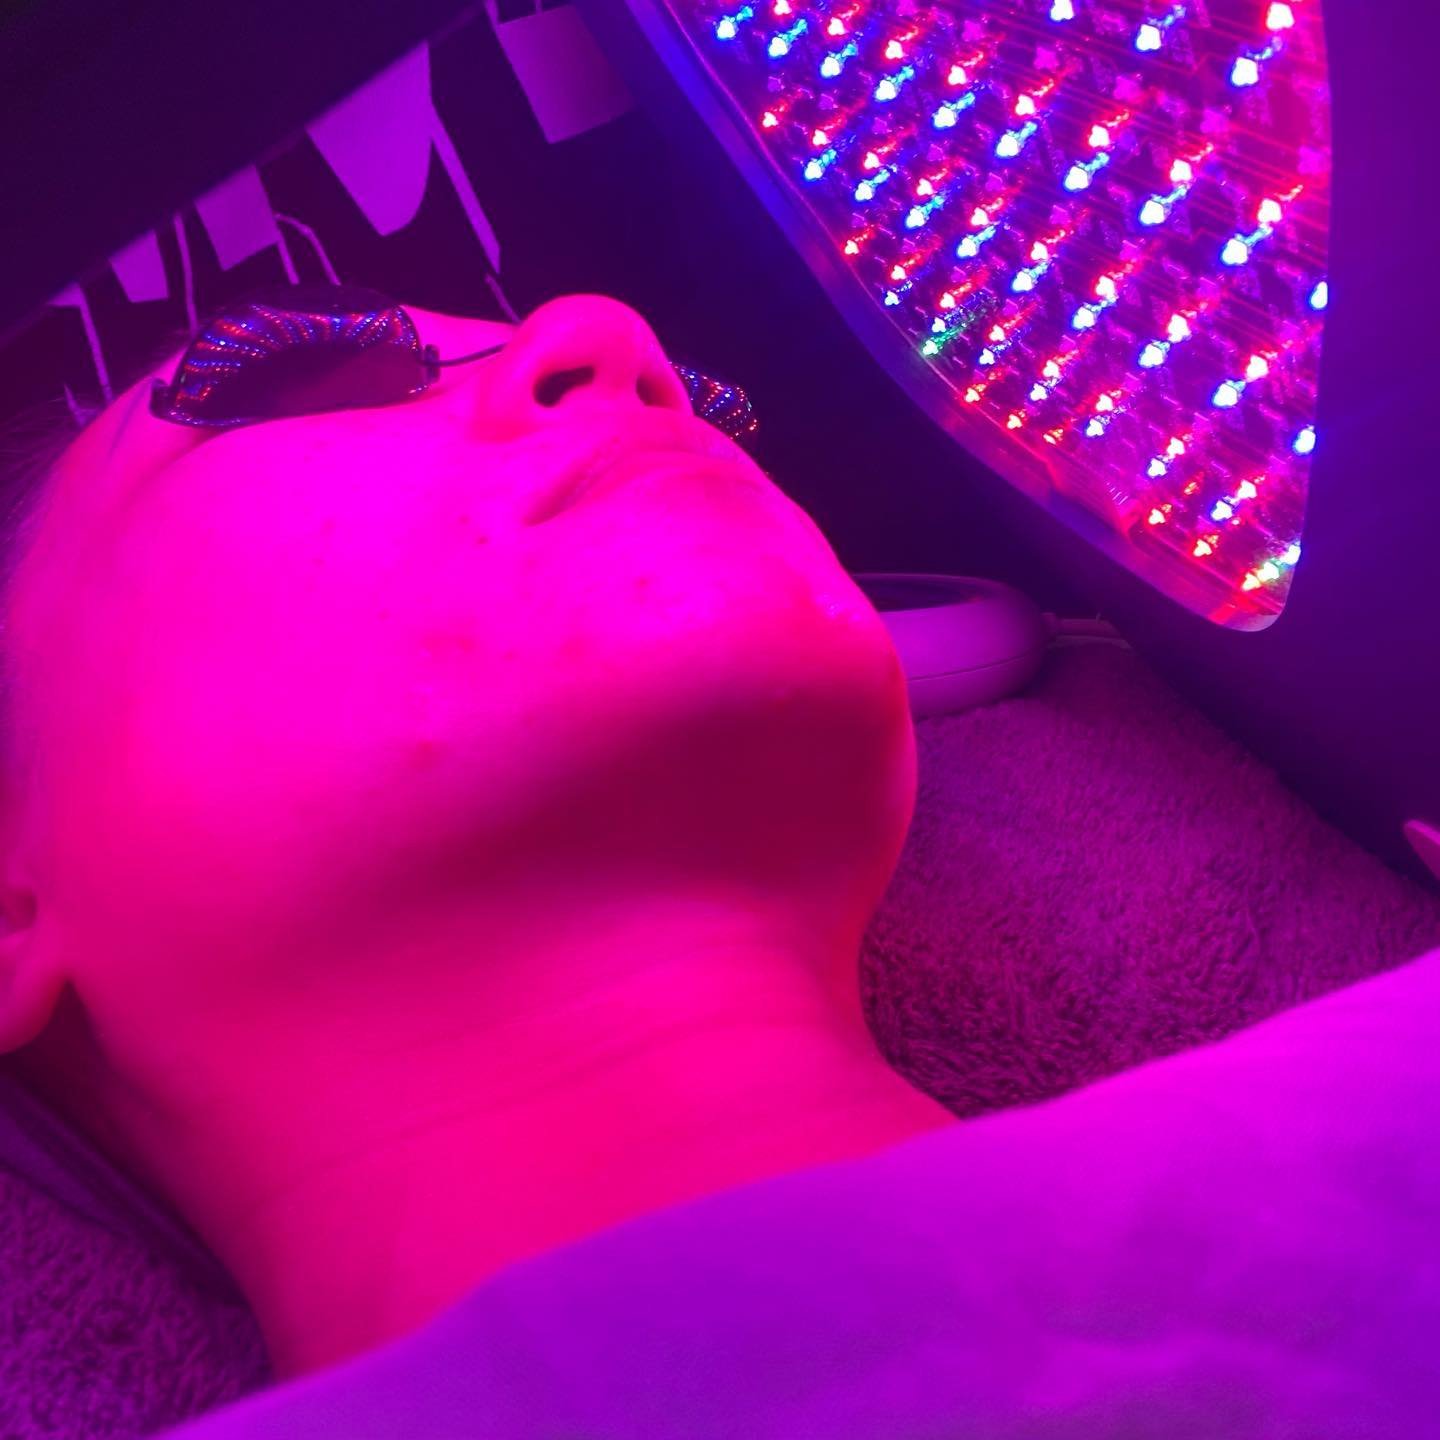 Say goodbye to dry, flaky skin and hello to a glowing complexion with LED therapy! Not only does it help combat acne, but it also stimulates collagen production for plumper, healthier-looking skin. It's like a disco party for your face, but with way 